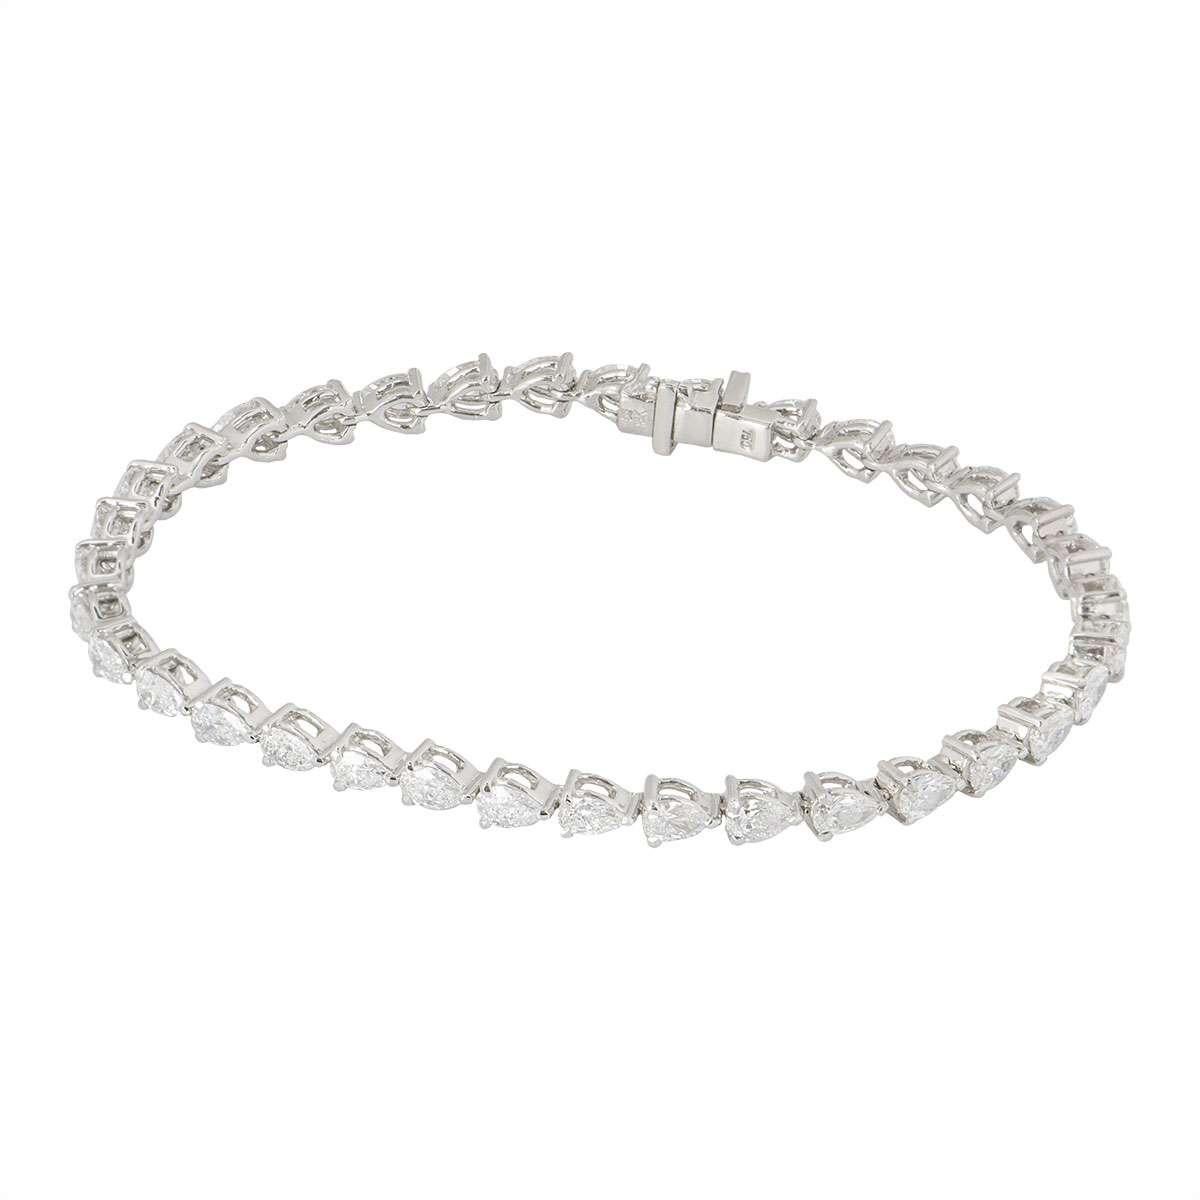 An elegant 18k white gold diamond line bracelet. The bracelet is made up of 35 claw set pear cut diamonds totalling 3.97ct. The diamonds are predominantly G/H colour and VS+ clarity. The bracelet has a tongue clasp with an additional snap clasp